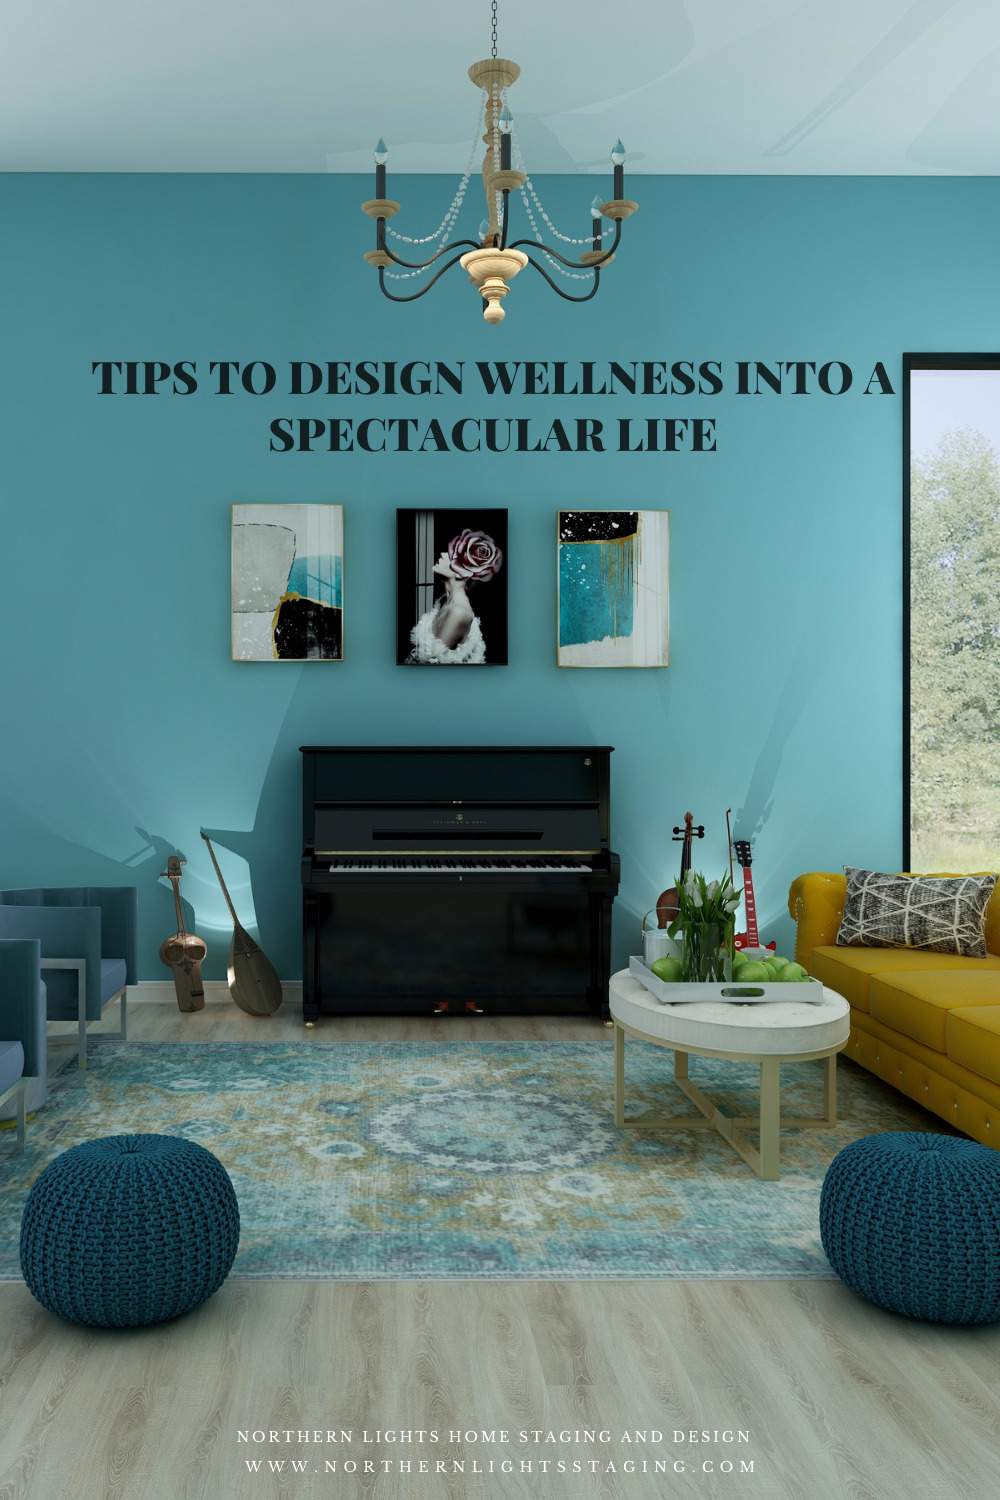 Tips to Design Wellness into a Spectacular Life